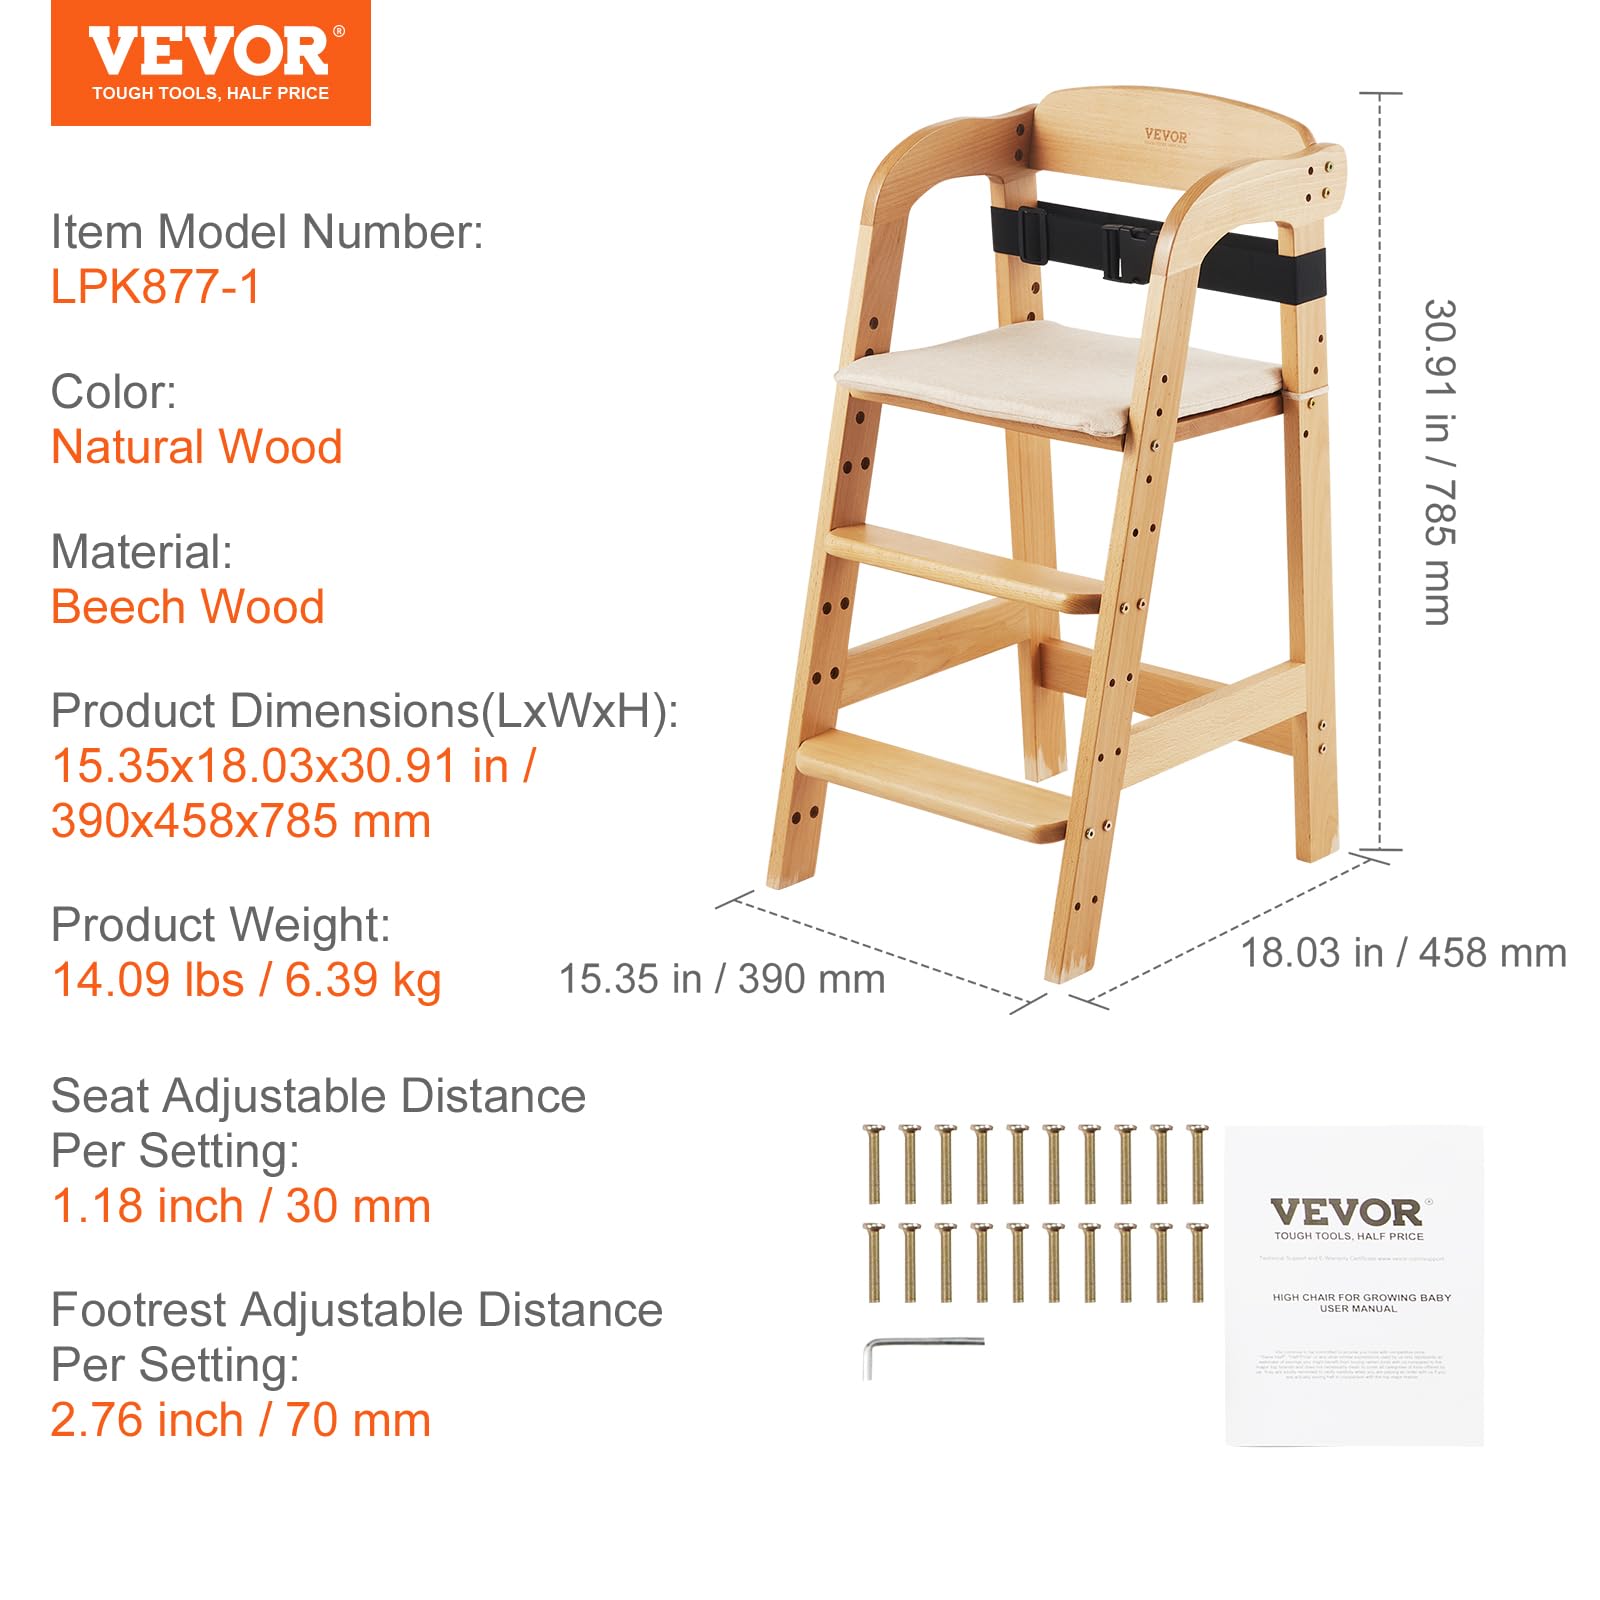 VEVOR Wooden Convertible Adjustable Feeding, Eat & Grow High Cushion, Portable Baby Dining Booster Seat, Beech Wood Toddler Chair, Natural